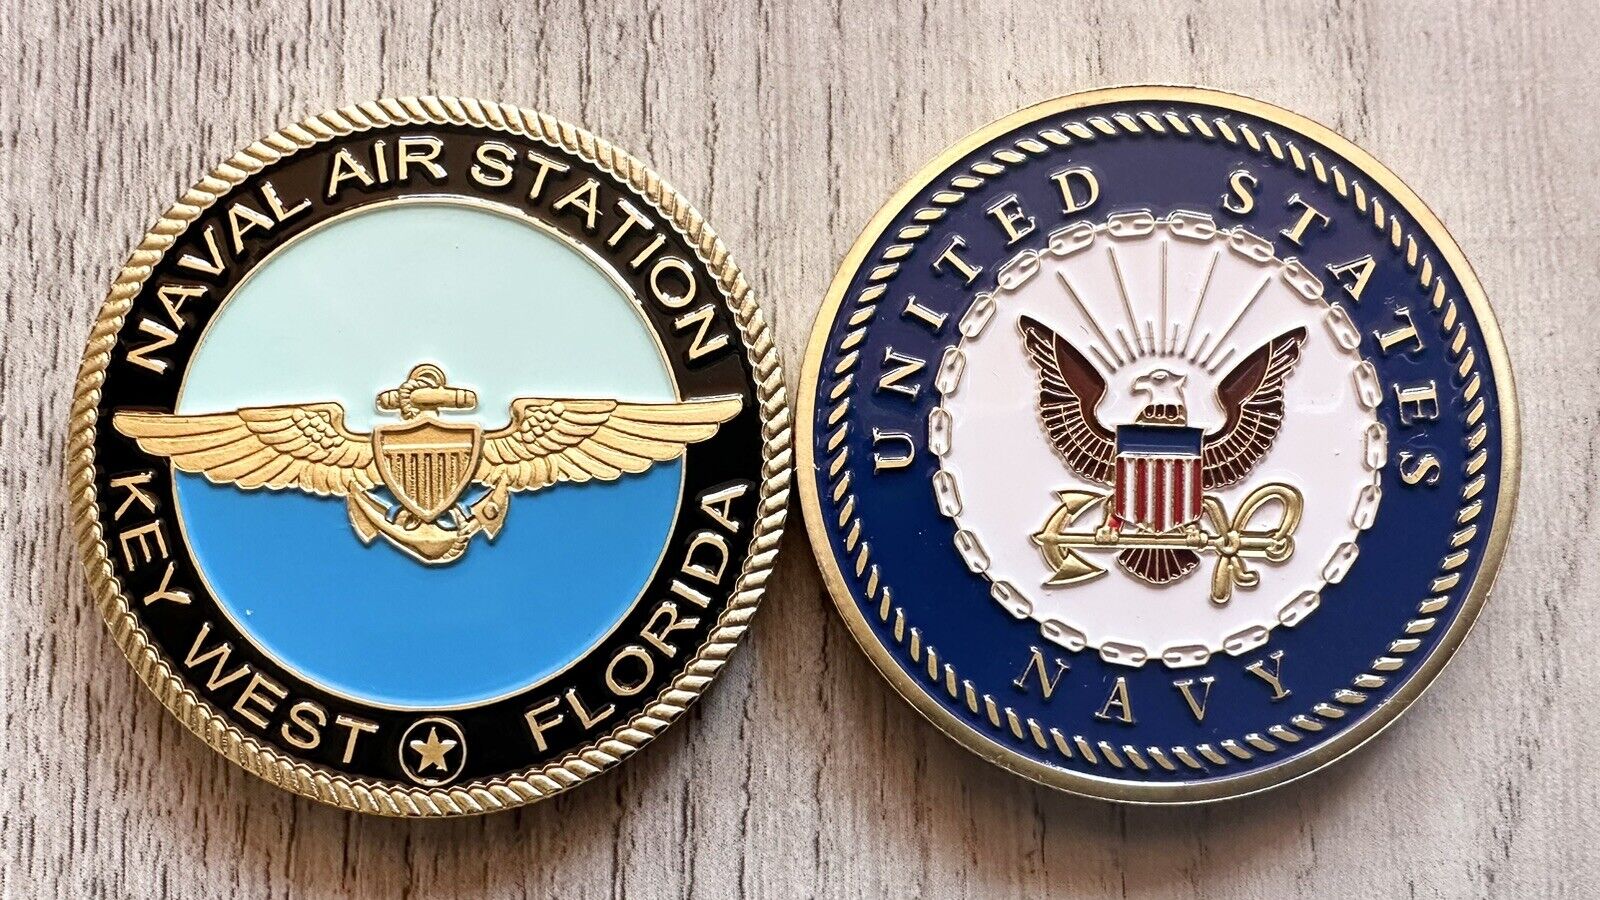 NAS NAVY NAVAL AIR STATION KEY WEST FLORIDA CHALLENGE COIN